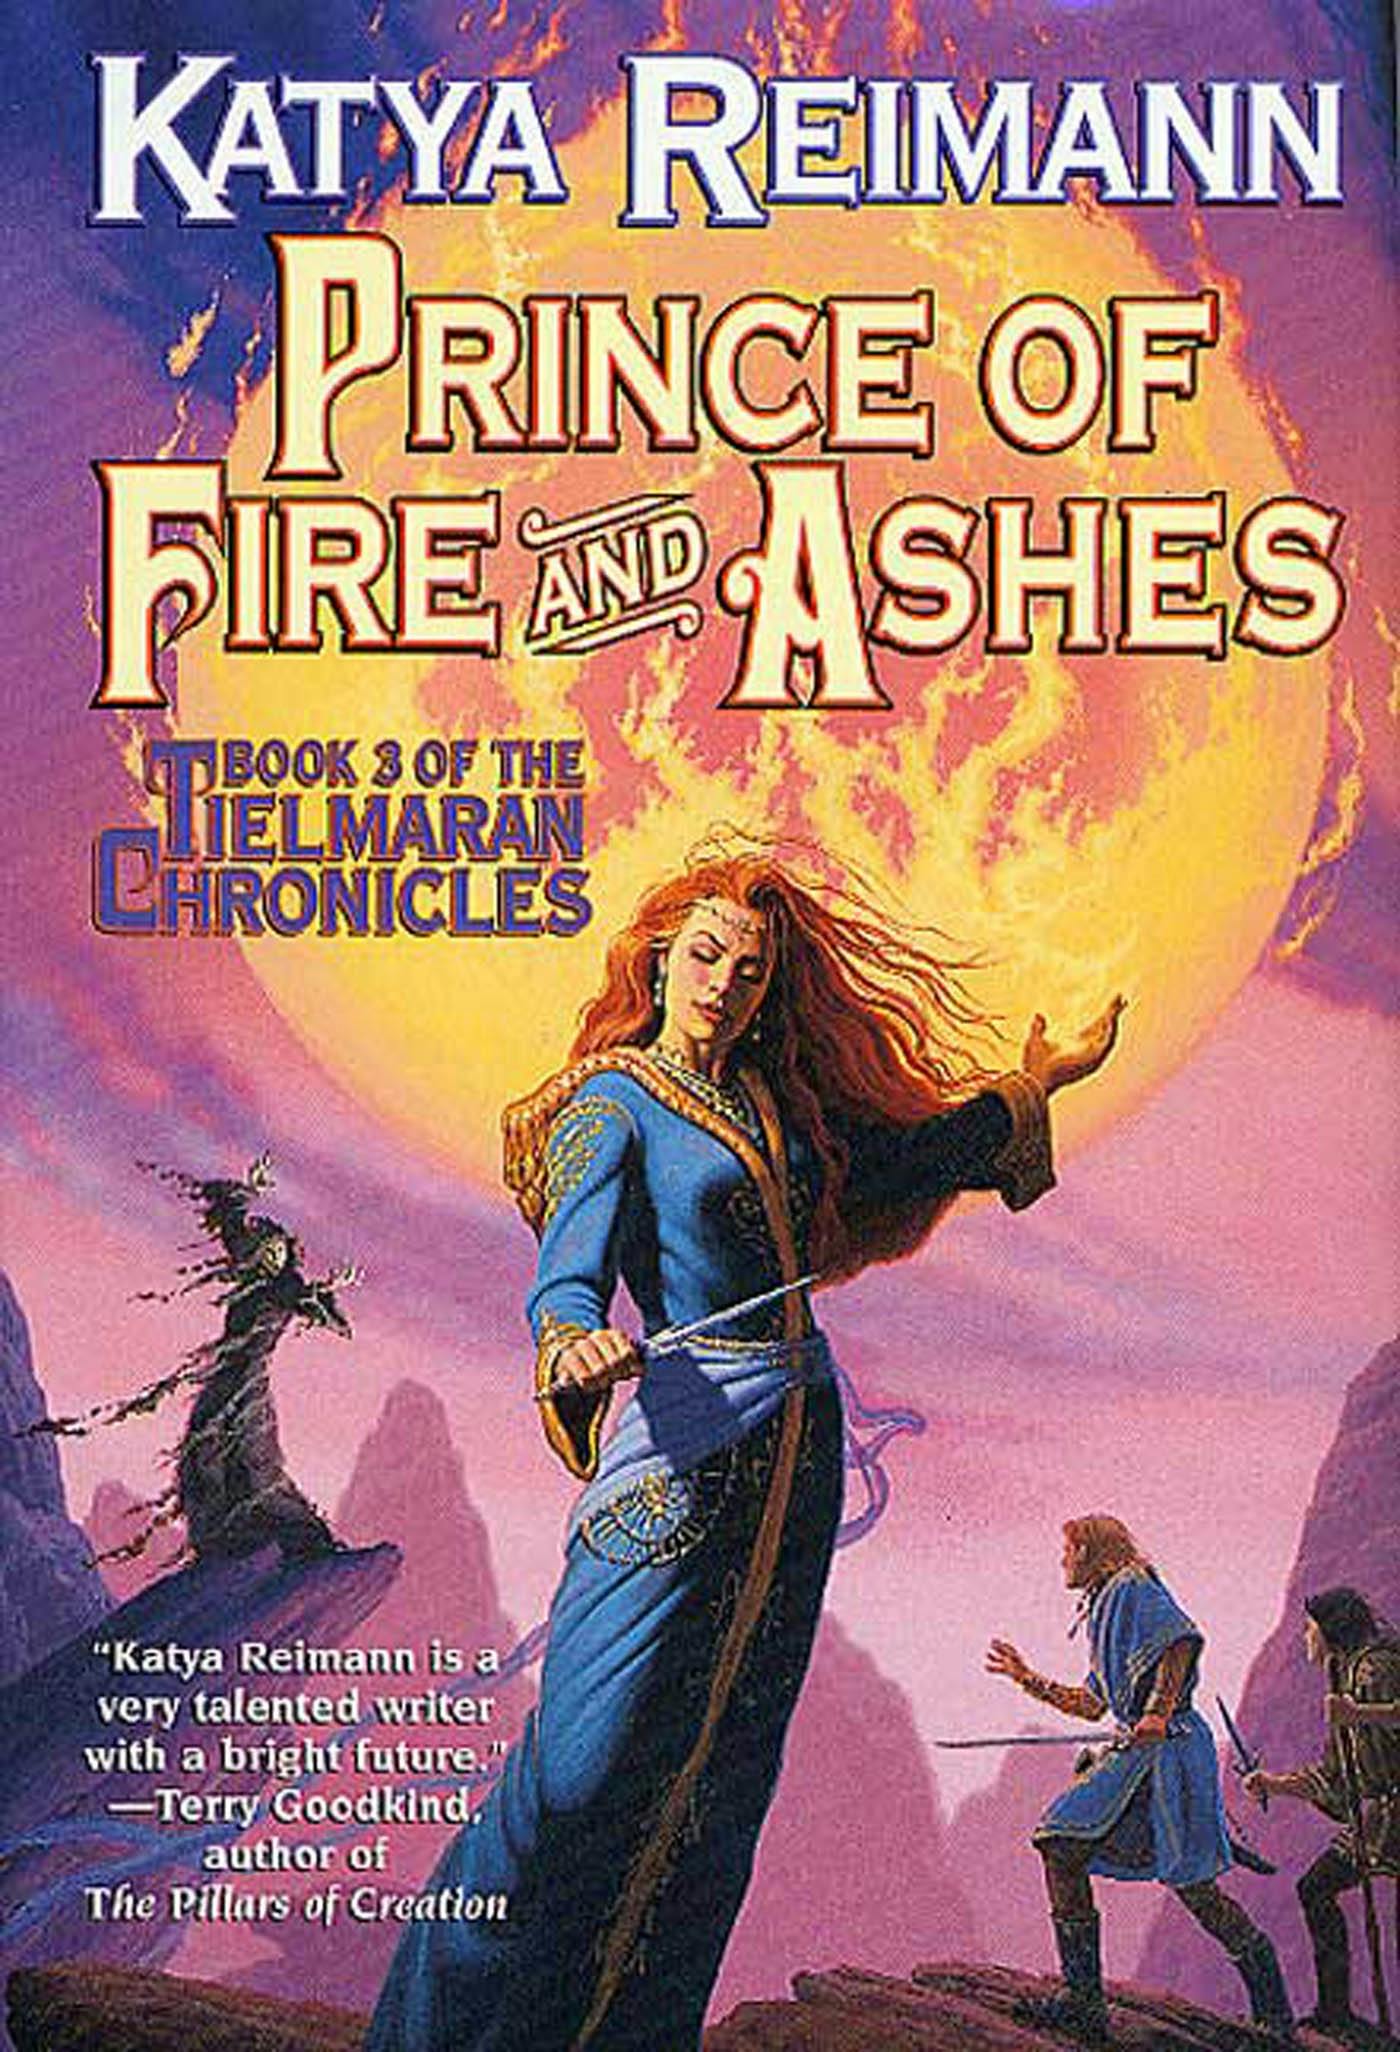 Cover for the book titled as: Prince of Fire and Ashes